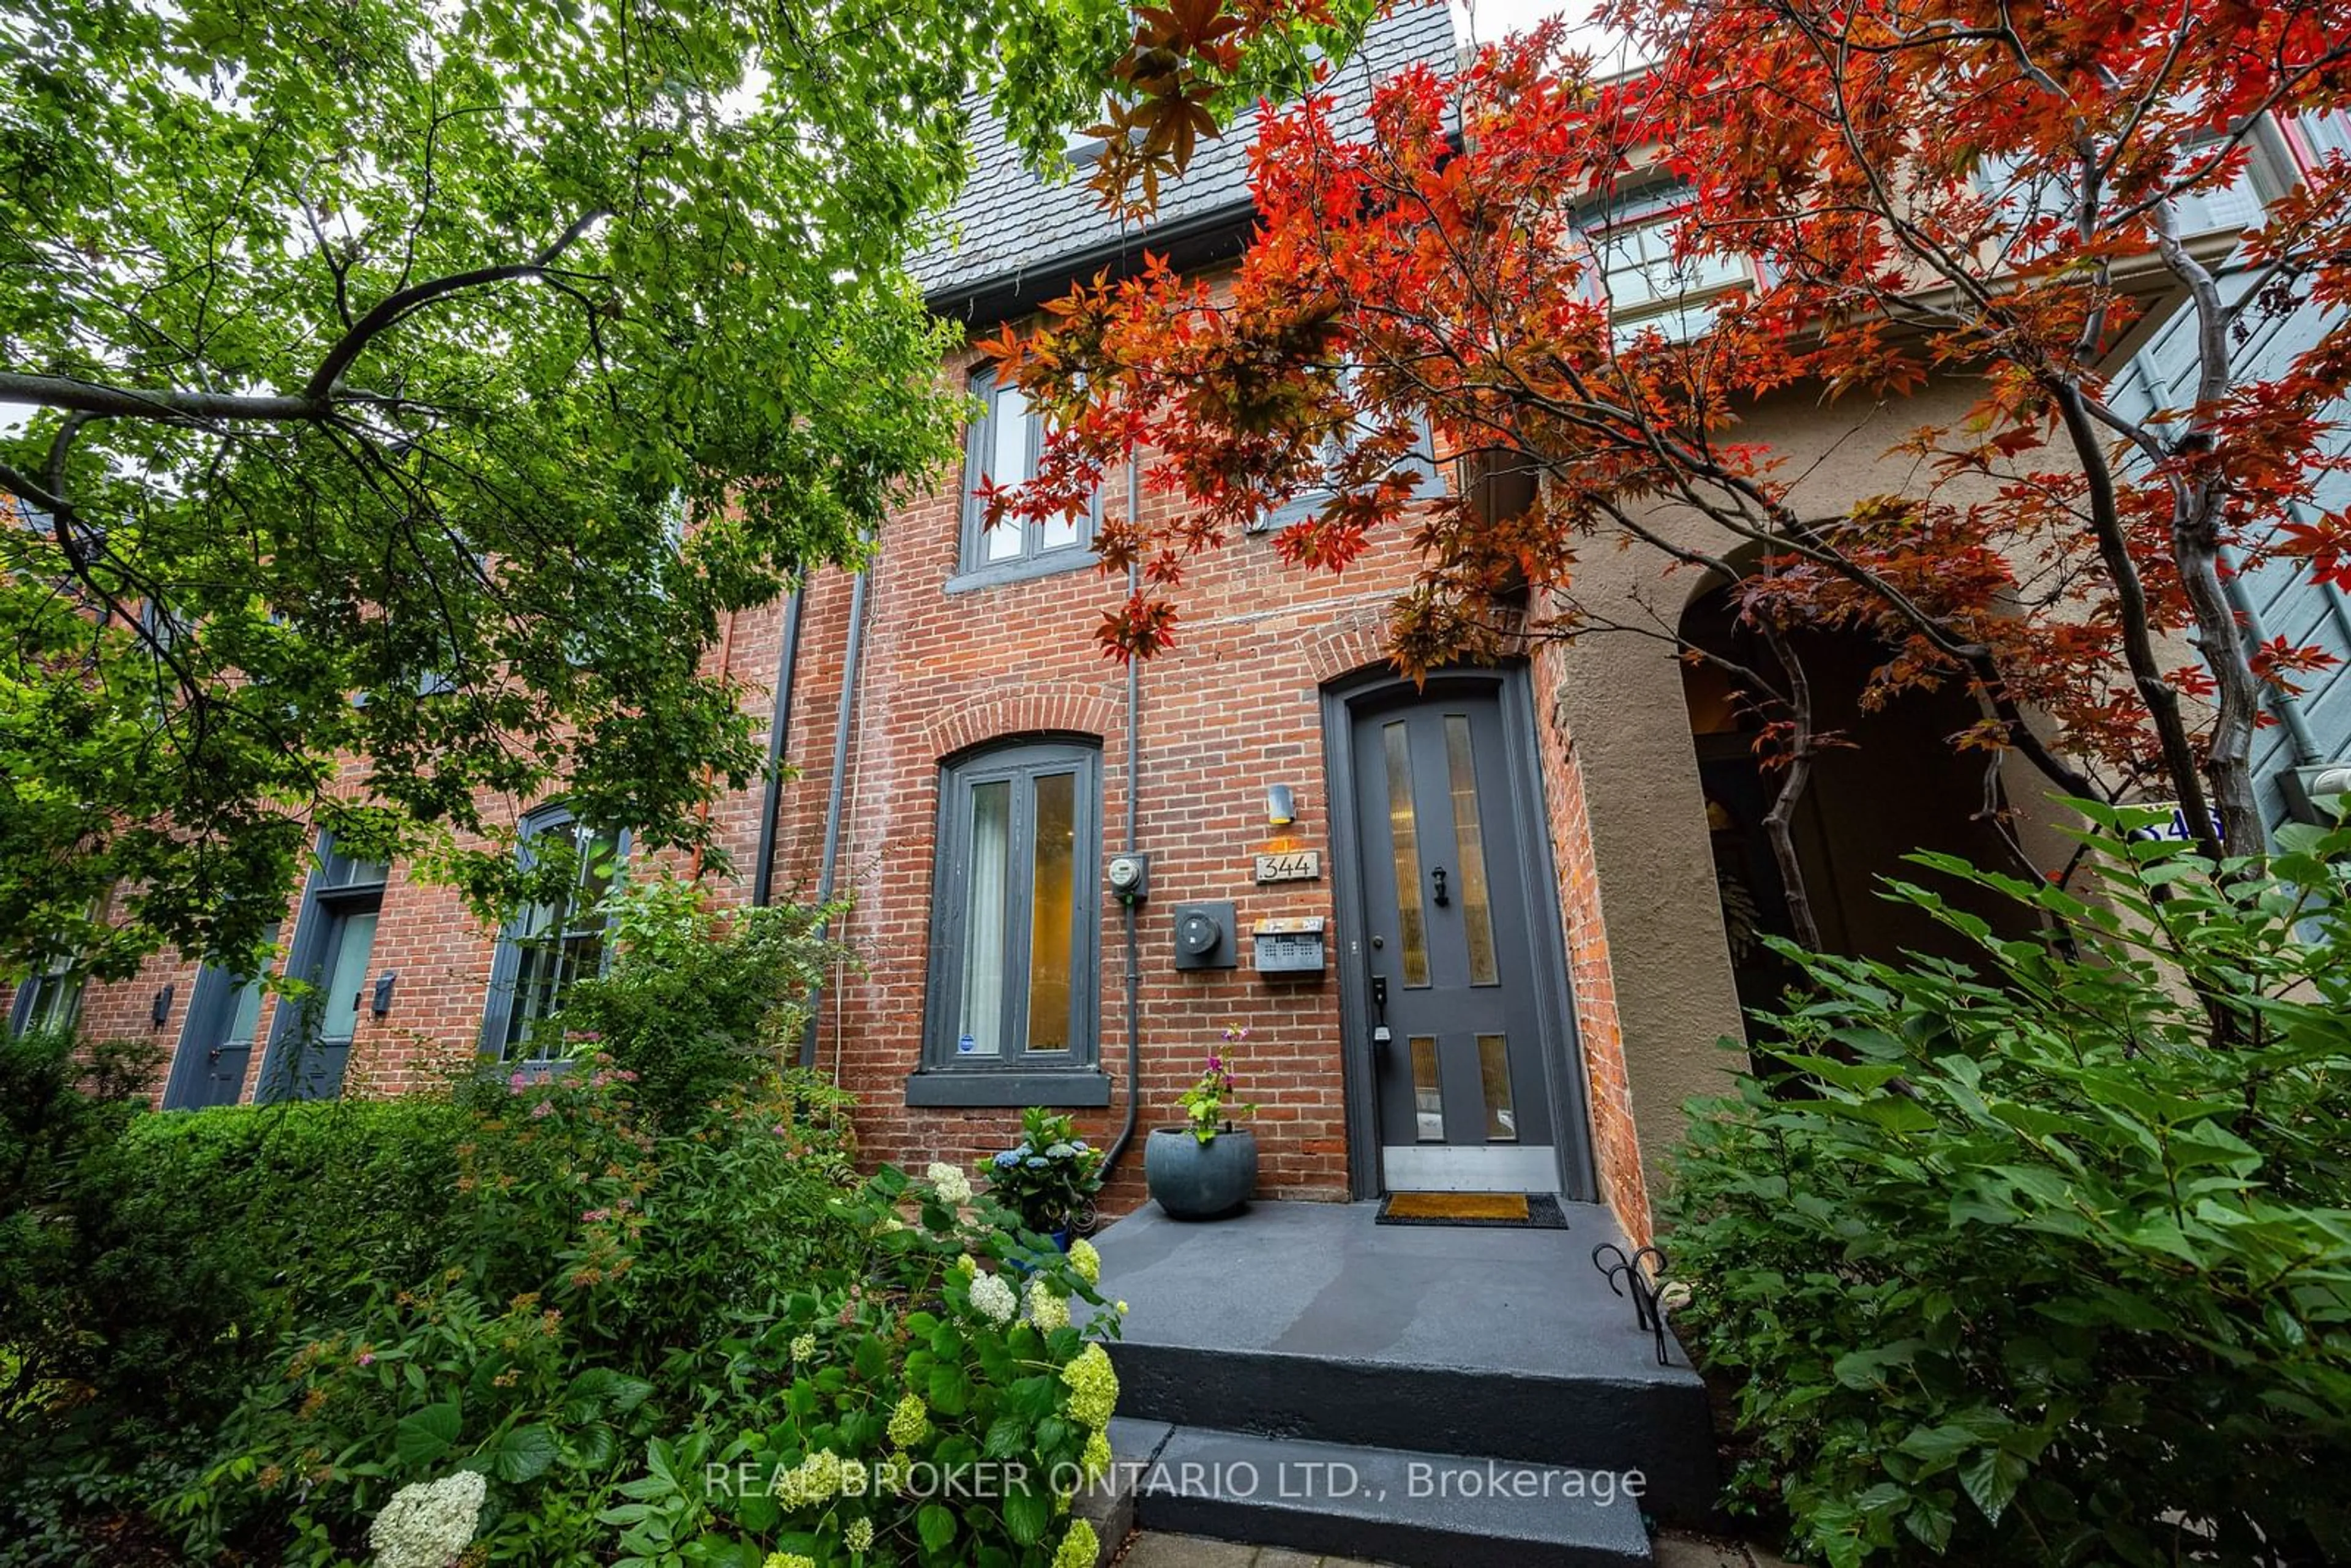 Home with brick exterior material for 344 Wellesley St, Toronto Ontario M4X 1H3